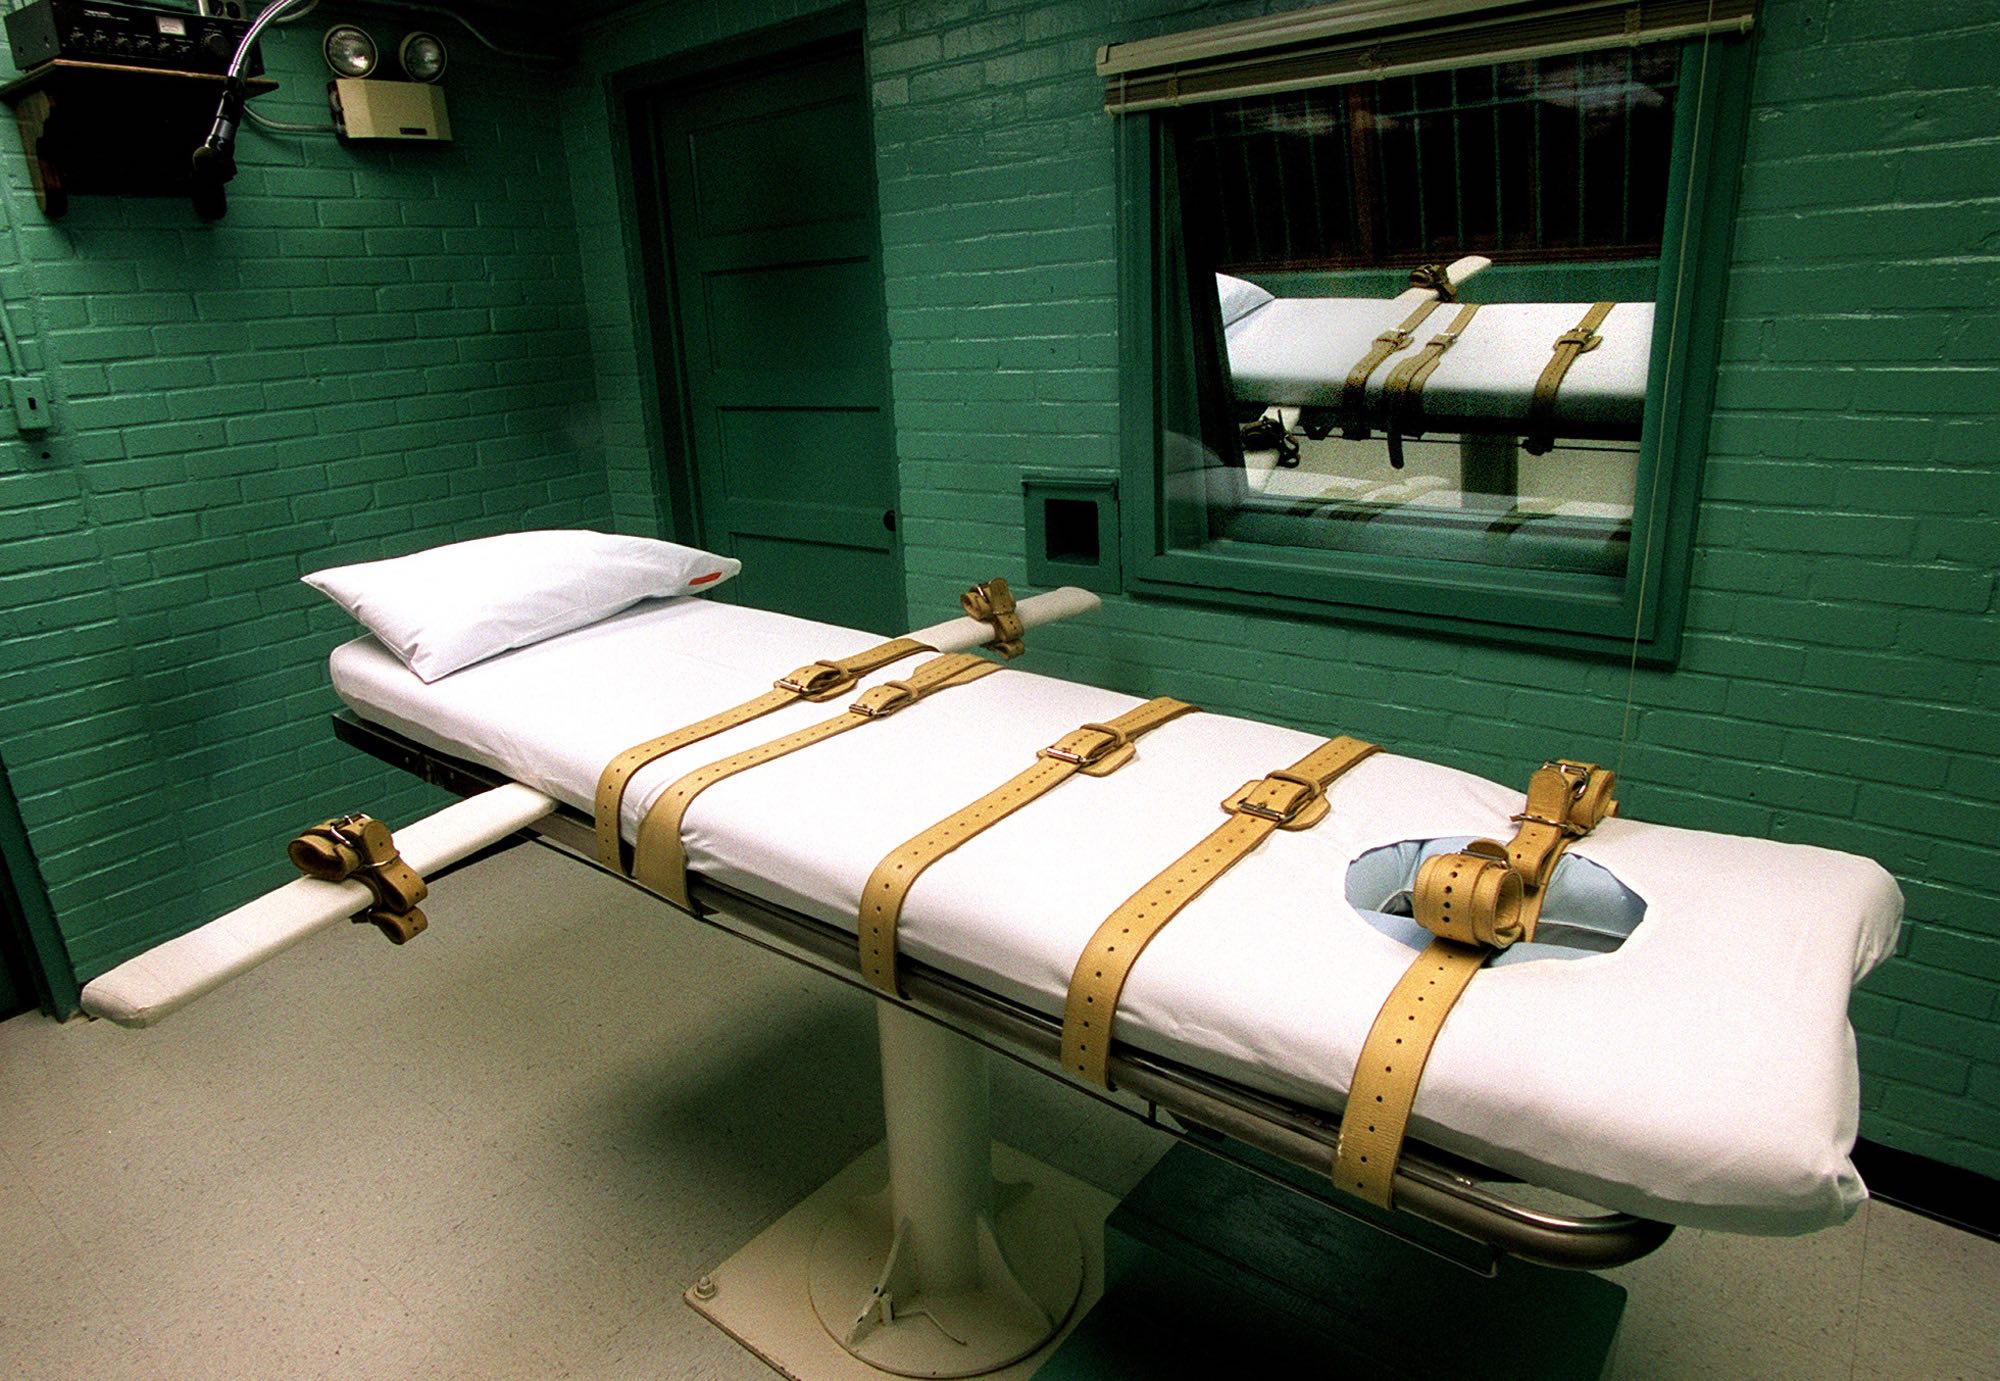 Help End the Death Penalty in Wyoming